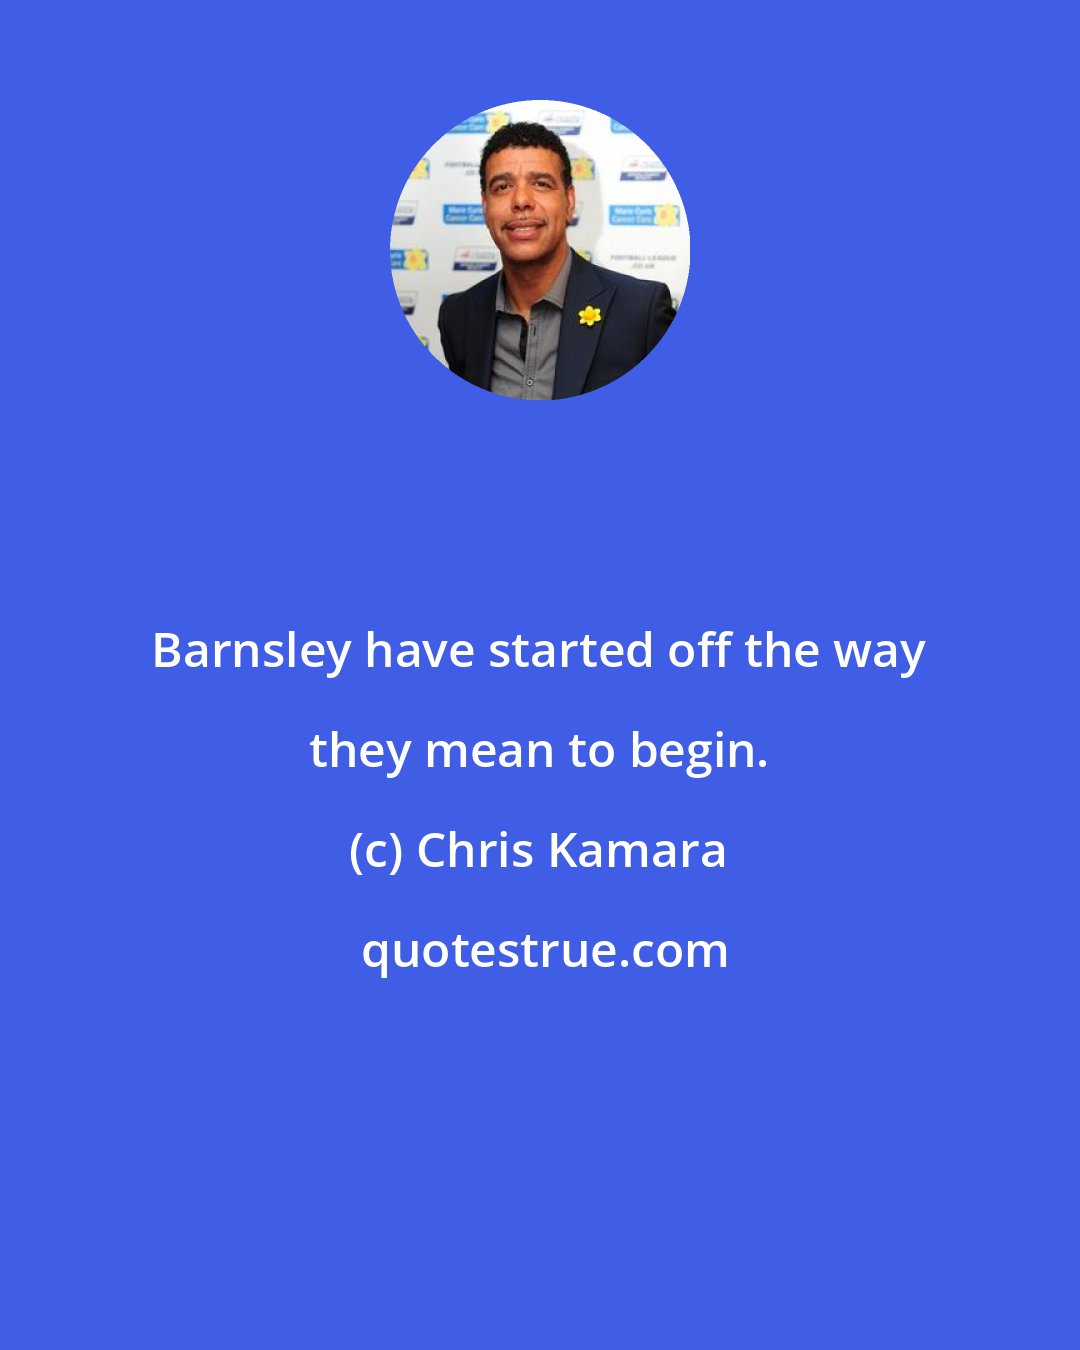 Chris Kamara: Barnsley have started off the way they mean to begin.